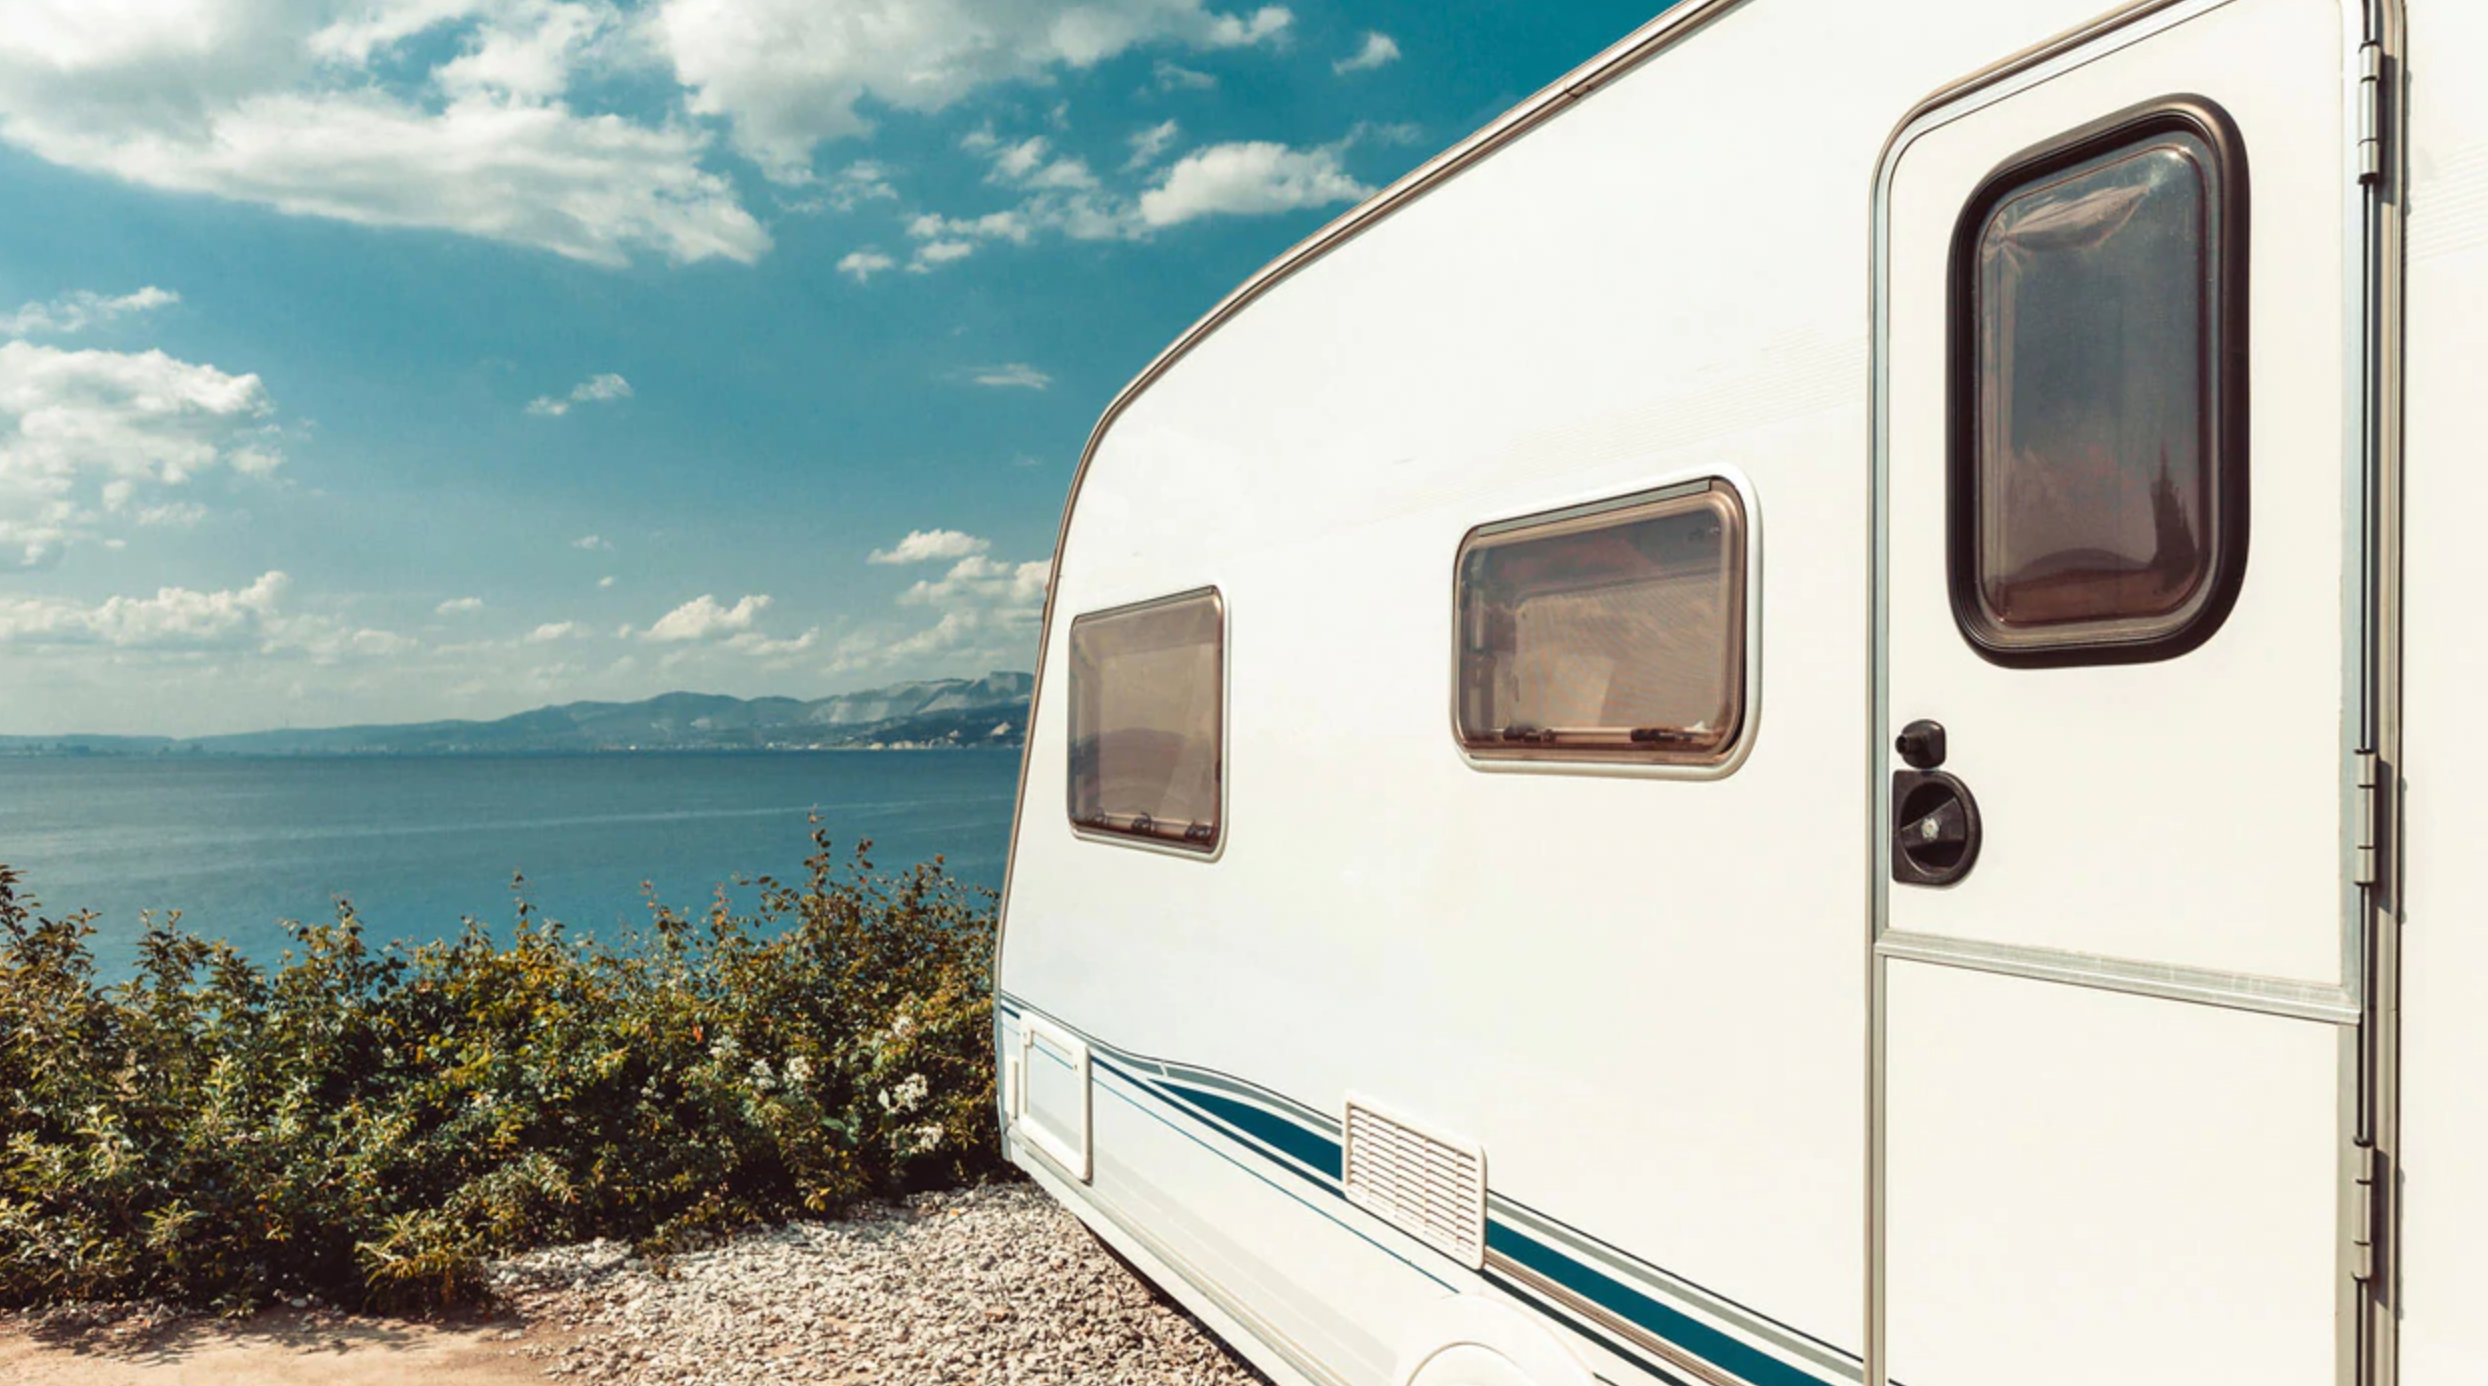 Caravan Checklist: What to check and what to pack ahead of your journey